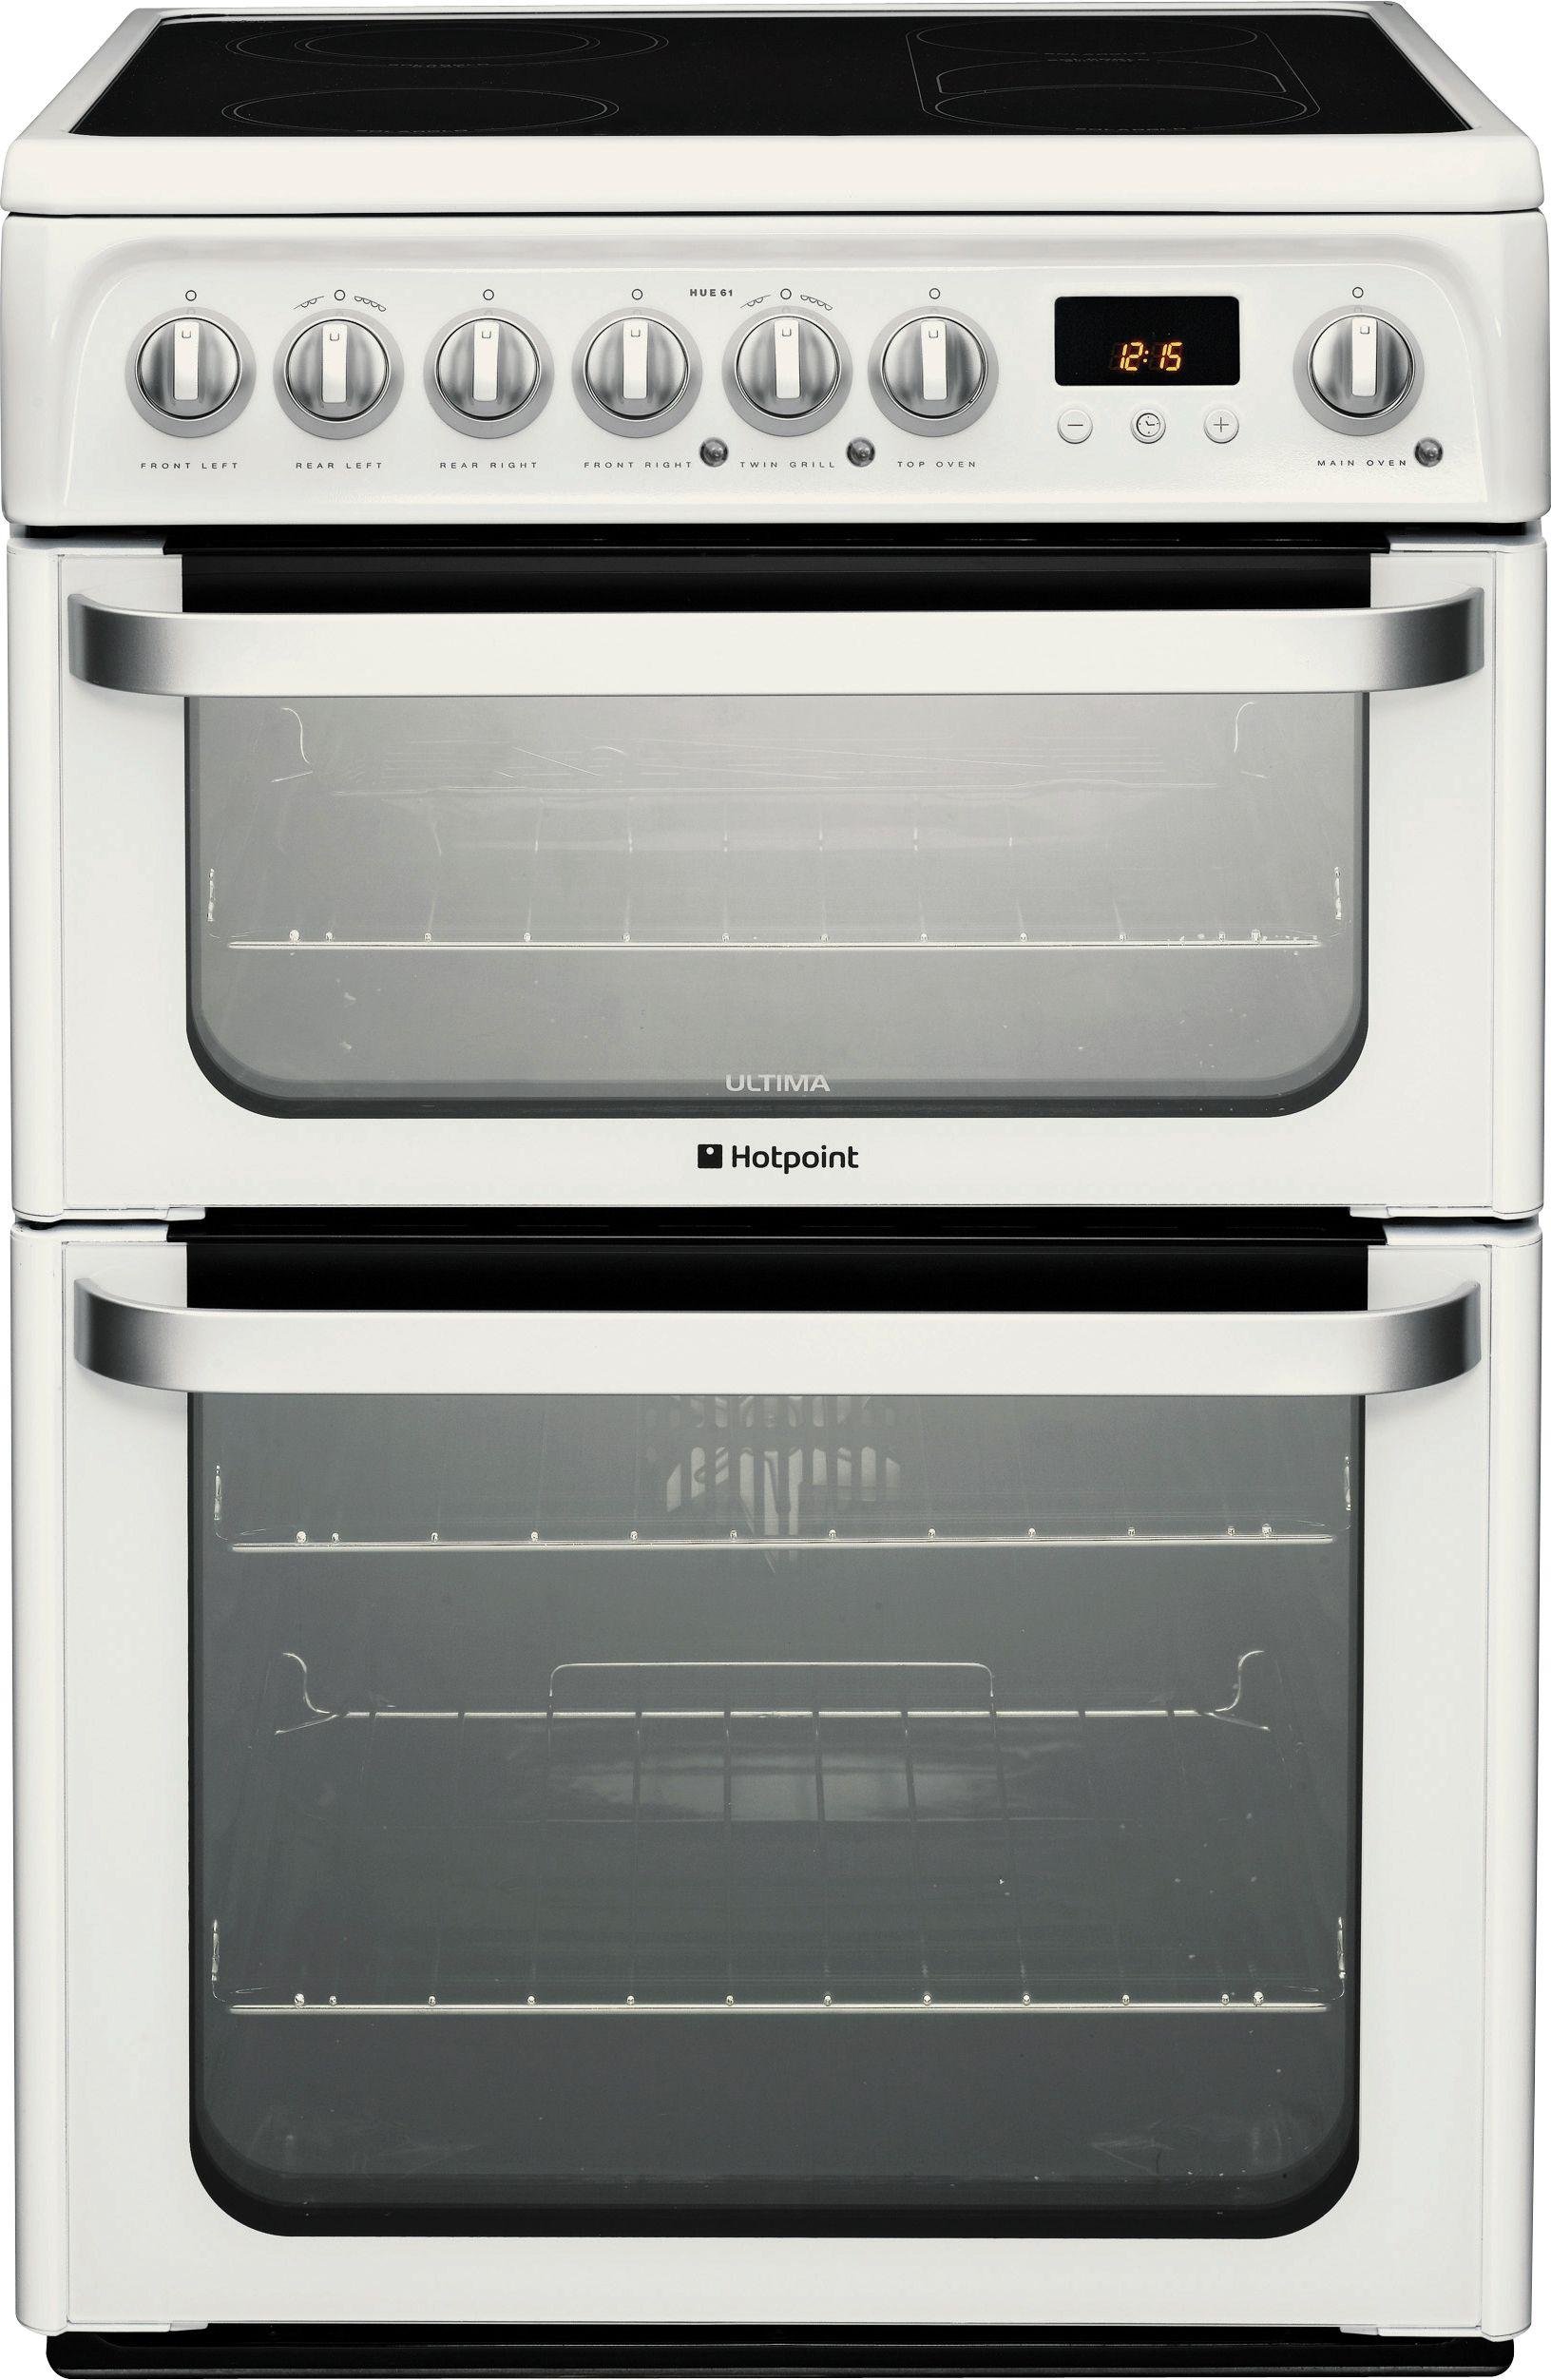 Hotpoint HUE62P 60cm Double Oven Electric Cooker - White